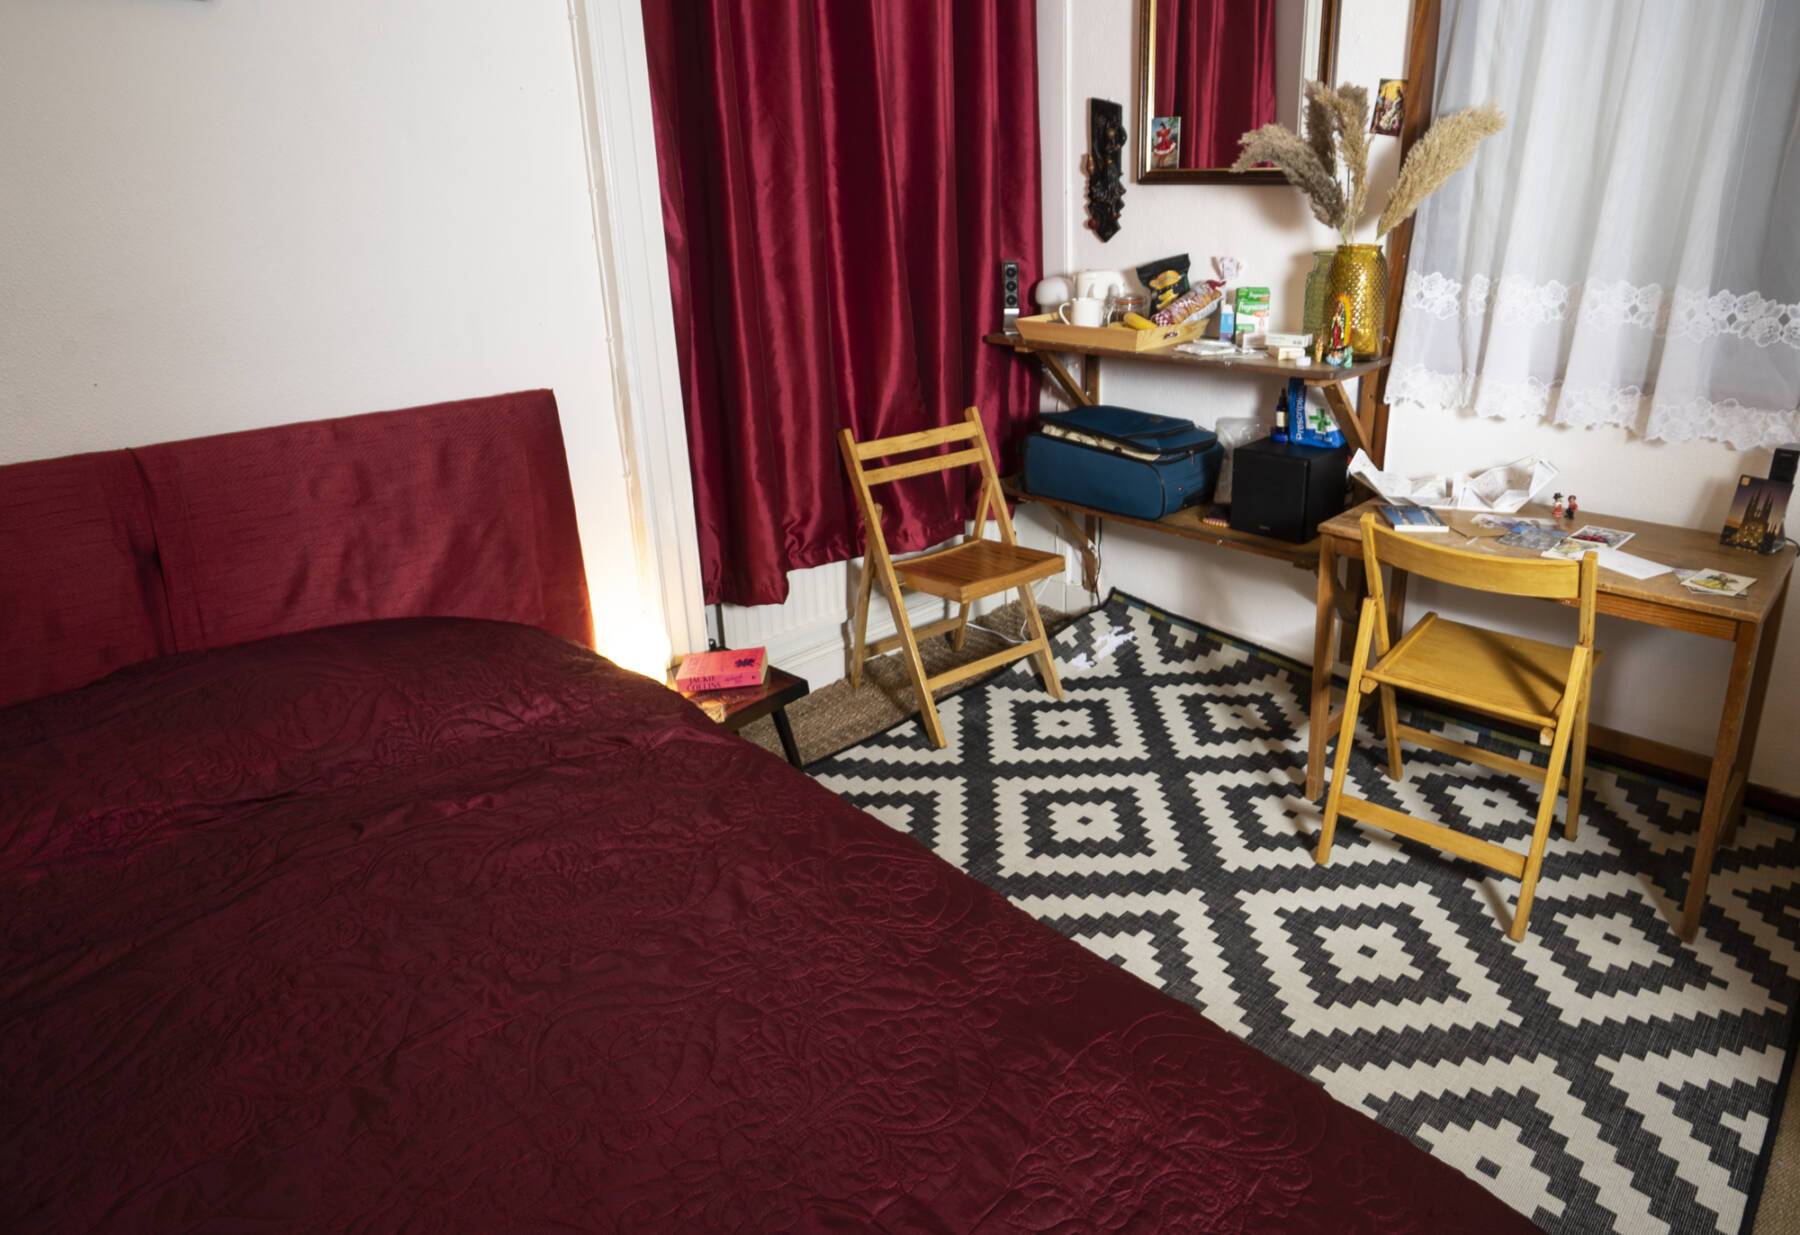 [gallery set up of a bedroom with cahirs and a desk, red duvet and red curtains and a black and white rug]